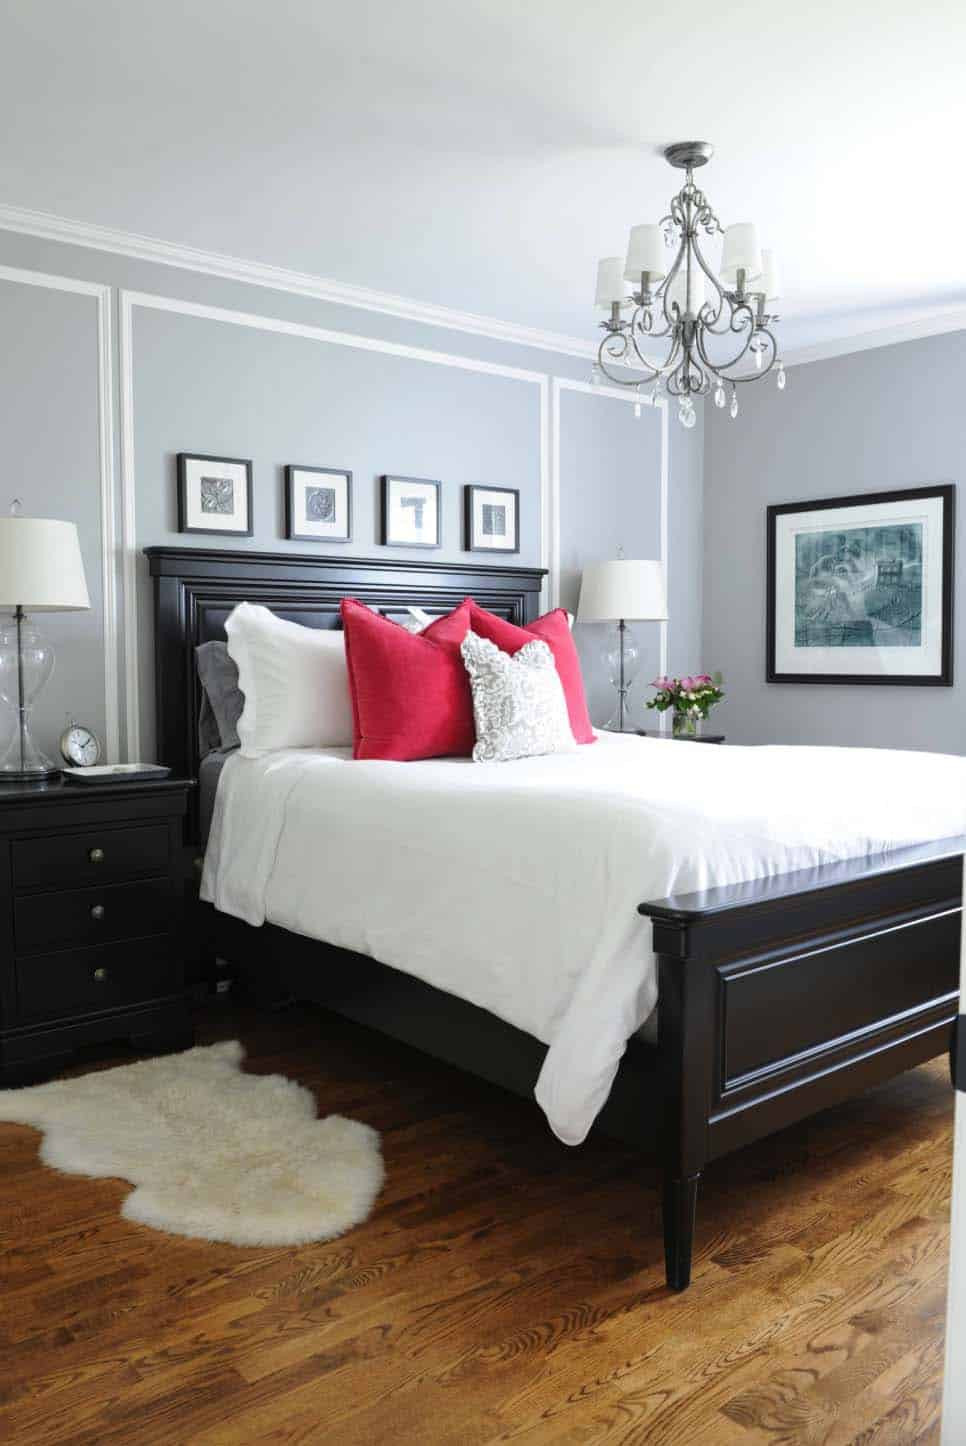 Master Bedroom Color Schemes
 25 Absolutely stunning master bedroom color scheme ideas